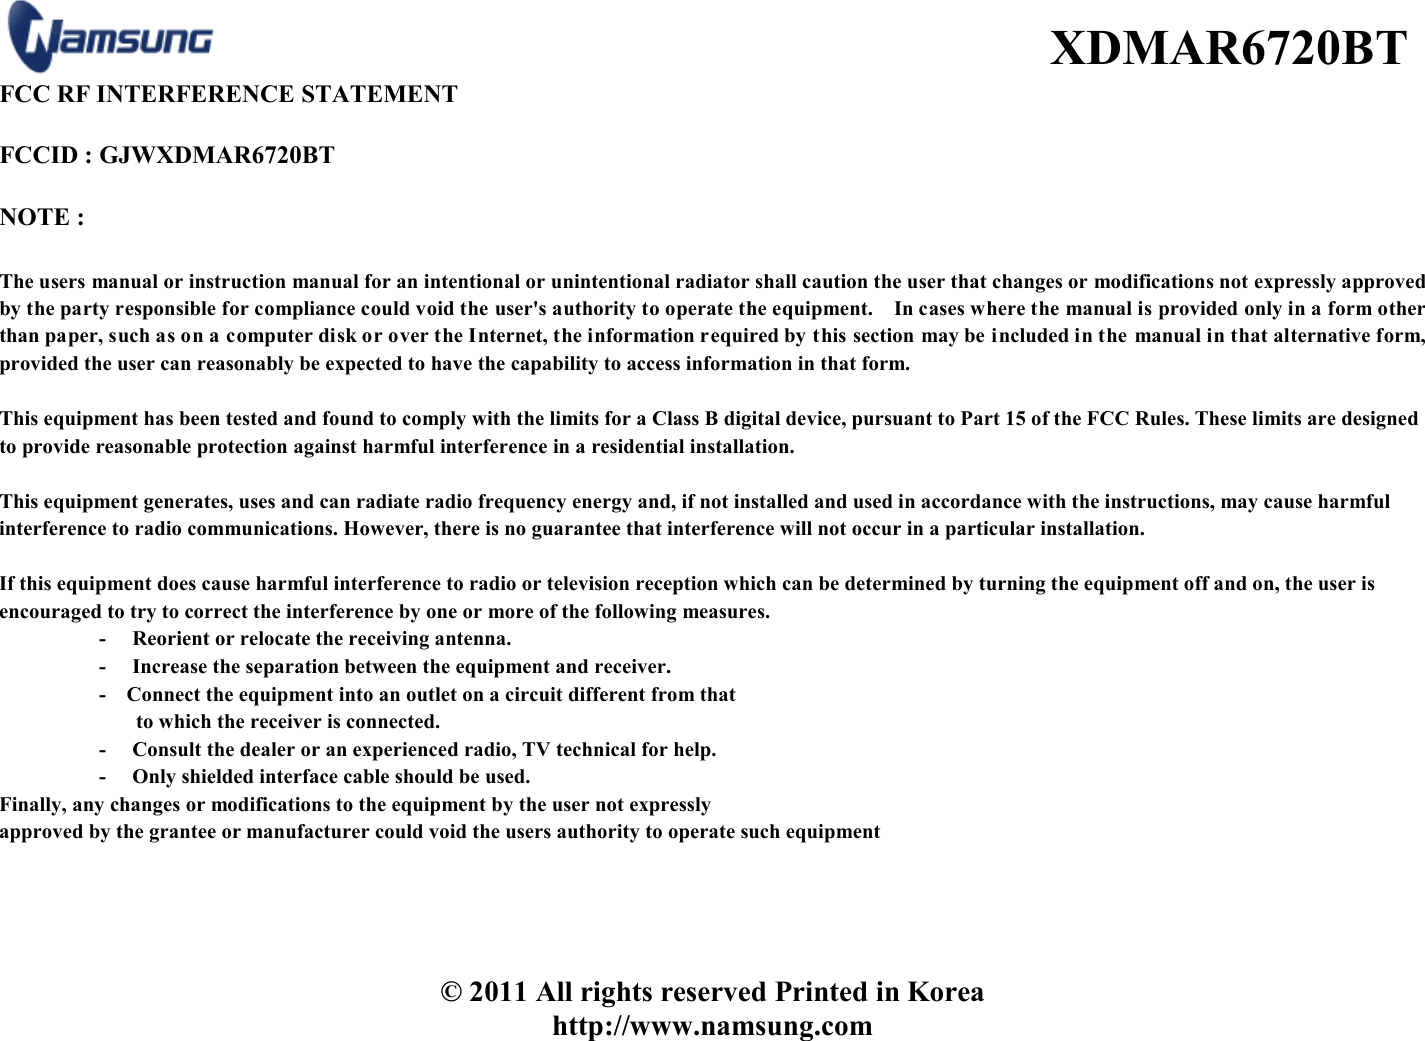  XDMAR6720BT © 2011 All rights reserved Printed in Korea http://www.namsung.com FCC RF INTERFERENCE STATEMENT    FCCID : GJWXDMAR6720BT  NOTE :    The users manual or instruction manual for an intentional or unintentional radiator shall caution the user that changes or modifications not expressly approved by the party responsible for compliance could void the user&apos;s authority to operate the equipment.    In cases where the manual is provided only in a form other than paper, such as on a computer disk or over the Internet, the information required by this section may be included in the manual in that alternative form, provided the user can reasonably be expected to have the capability to access information in that form.  This equipment has been tested and found to comply with the limits for a Class B digital device, pursuant to Part 15 of the FCC Rules. These limits are designed to provide reasonable protection against harmful interference in a residential installation.    This equipment generates, uses and can radiate radio frequency energy and, if not installed and used in accordance with the instructions, may cause harmful interference to radio communications. However, there is no guarantee that interference will not occur in a particular installation.    If this equipment does cause harmful interference to radio or television reception which can be determined by turning the equipment off and on, the user is encouraged to try to correct the interference by one or more of the following measures.   -     Reorient or relocate the receiving antenna.   -     Increase the separation between the equipment and receiver.   -   Connect the equipment into an outlet on a circuit different from that   to which the receiver is connected.   -     Consult the dealer or an experienced radio, TV technical for help.   -     Only shielded interface cable should be used.   Finally, any changes or modifications to the equipment by the user not expressly   approved by the grantee or manufacturer could void the users authority to operate such equipment 